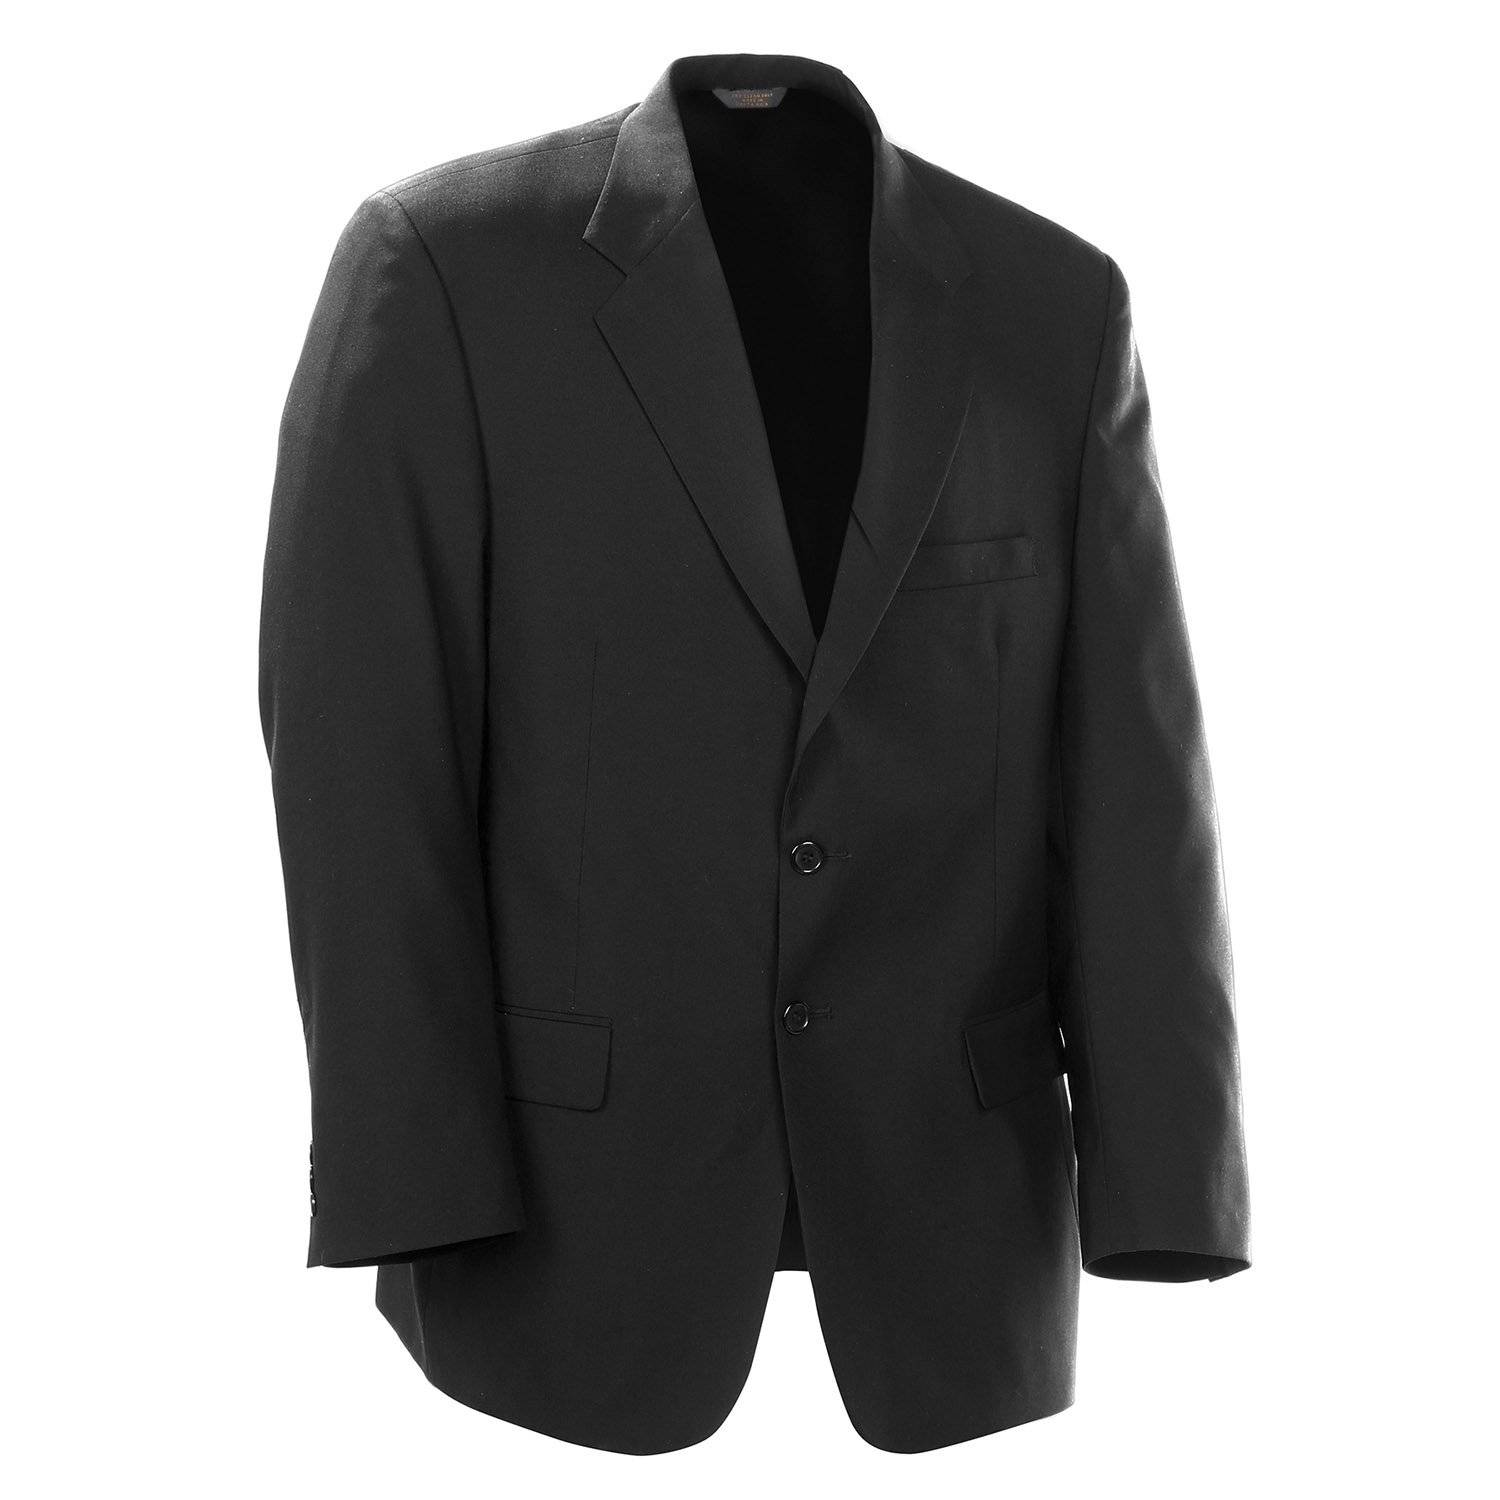 EDWARDS WOOL BLEND SINGLE BREASTED SUIT COAT